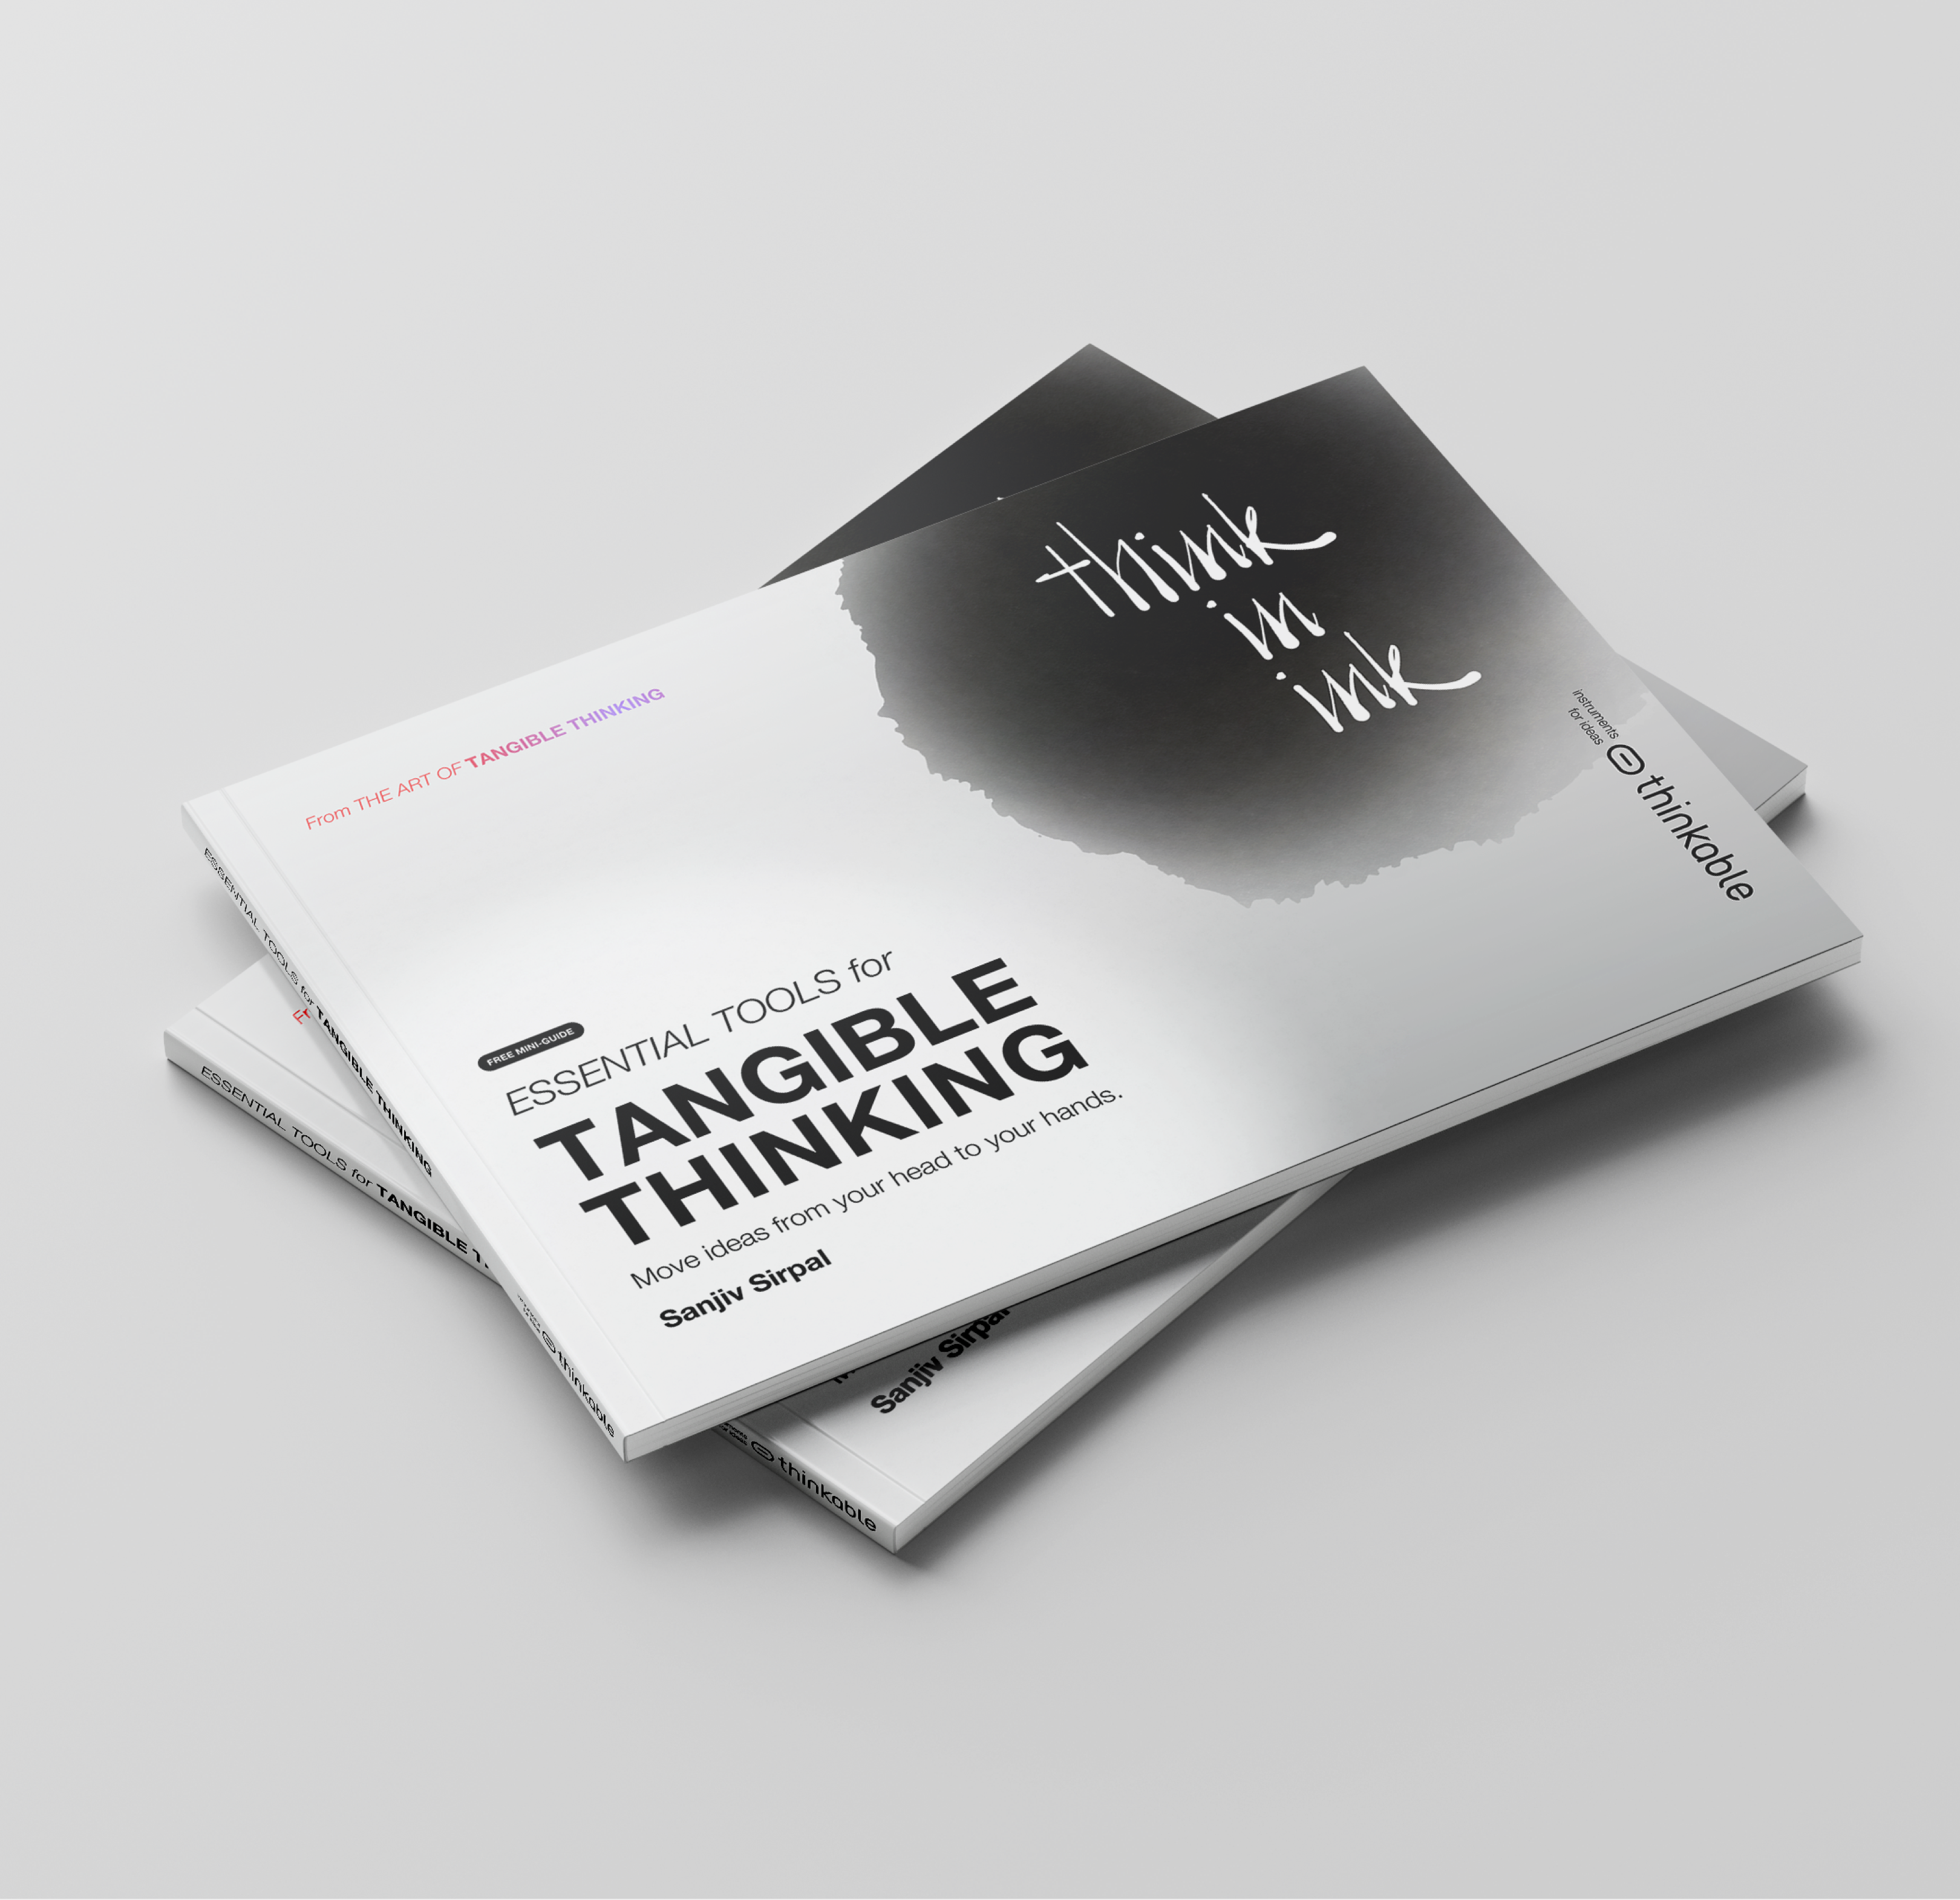 Essential Tools for Tangible Thinking - Mini Guide